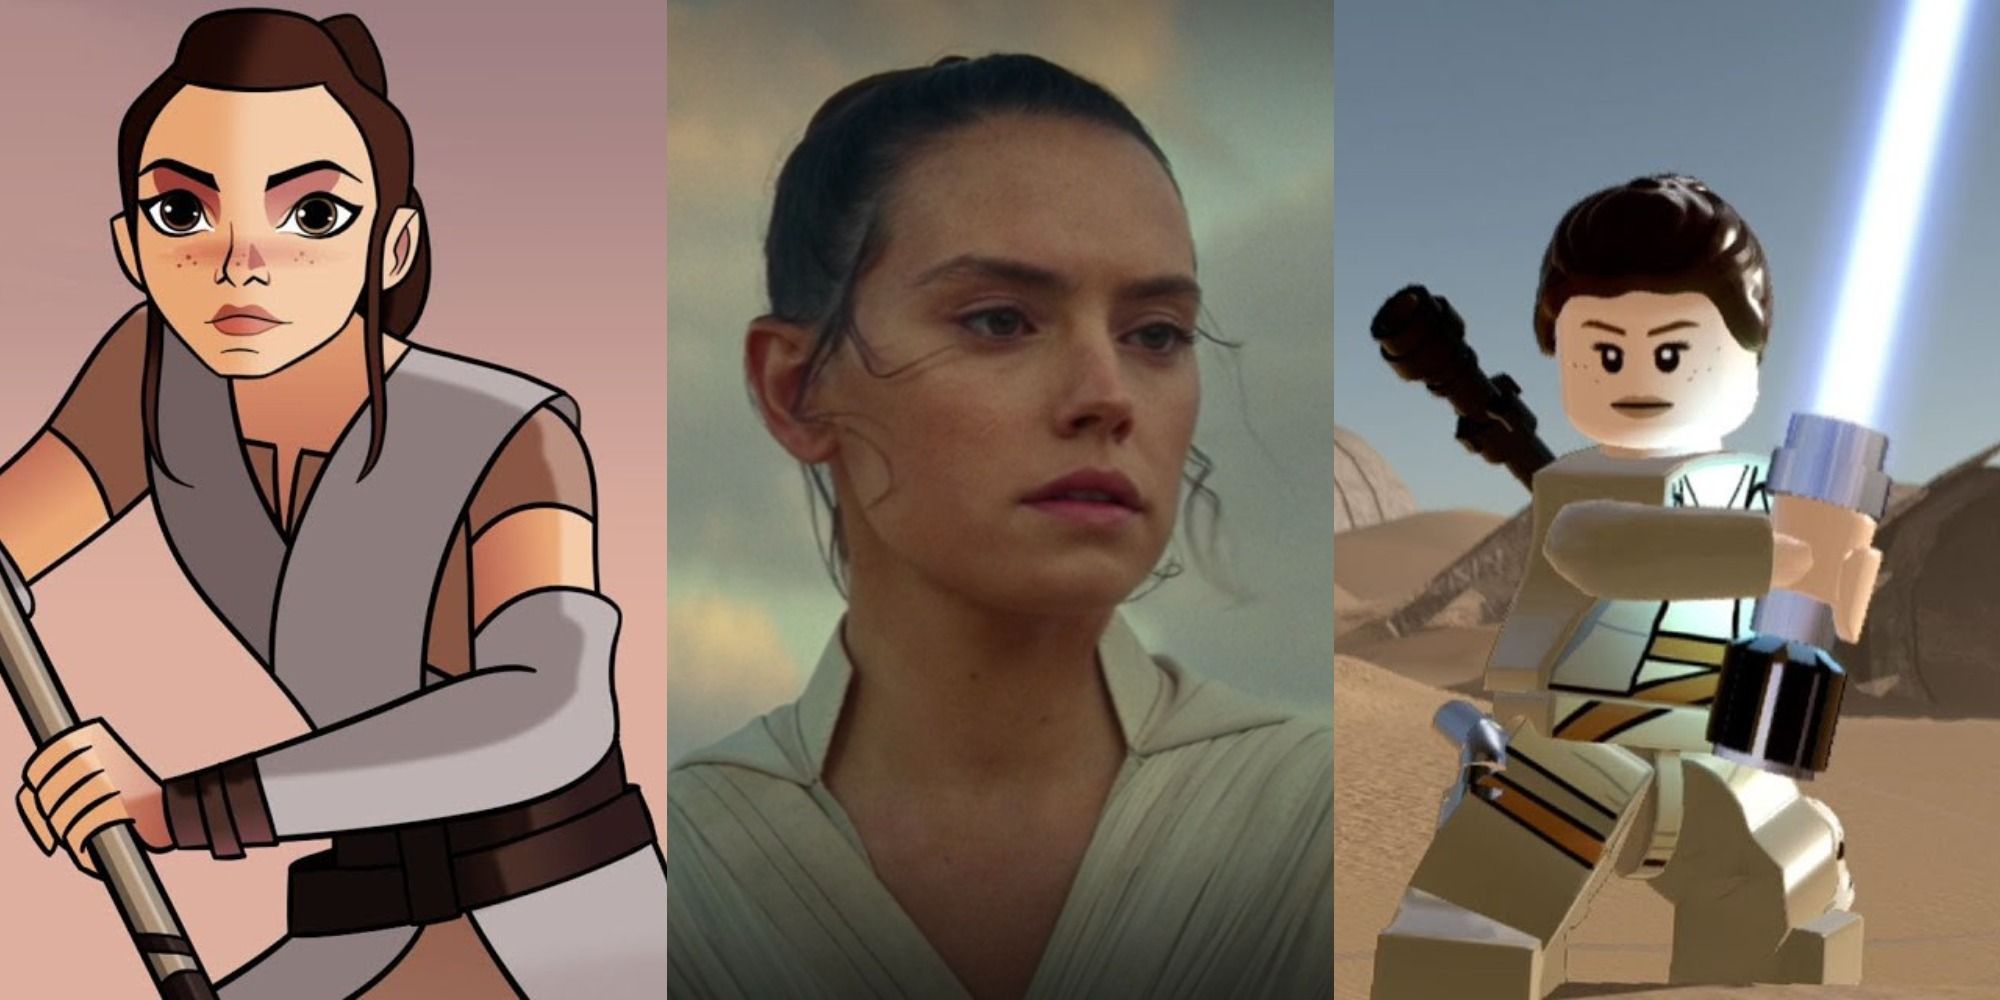 #39 Star Wars #39 : 5 Possibilities For How Rey Could Be Involved In Upcoming